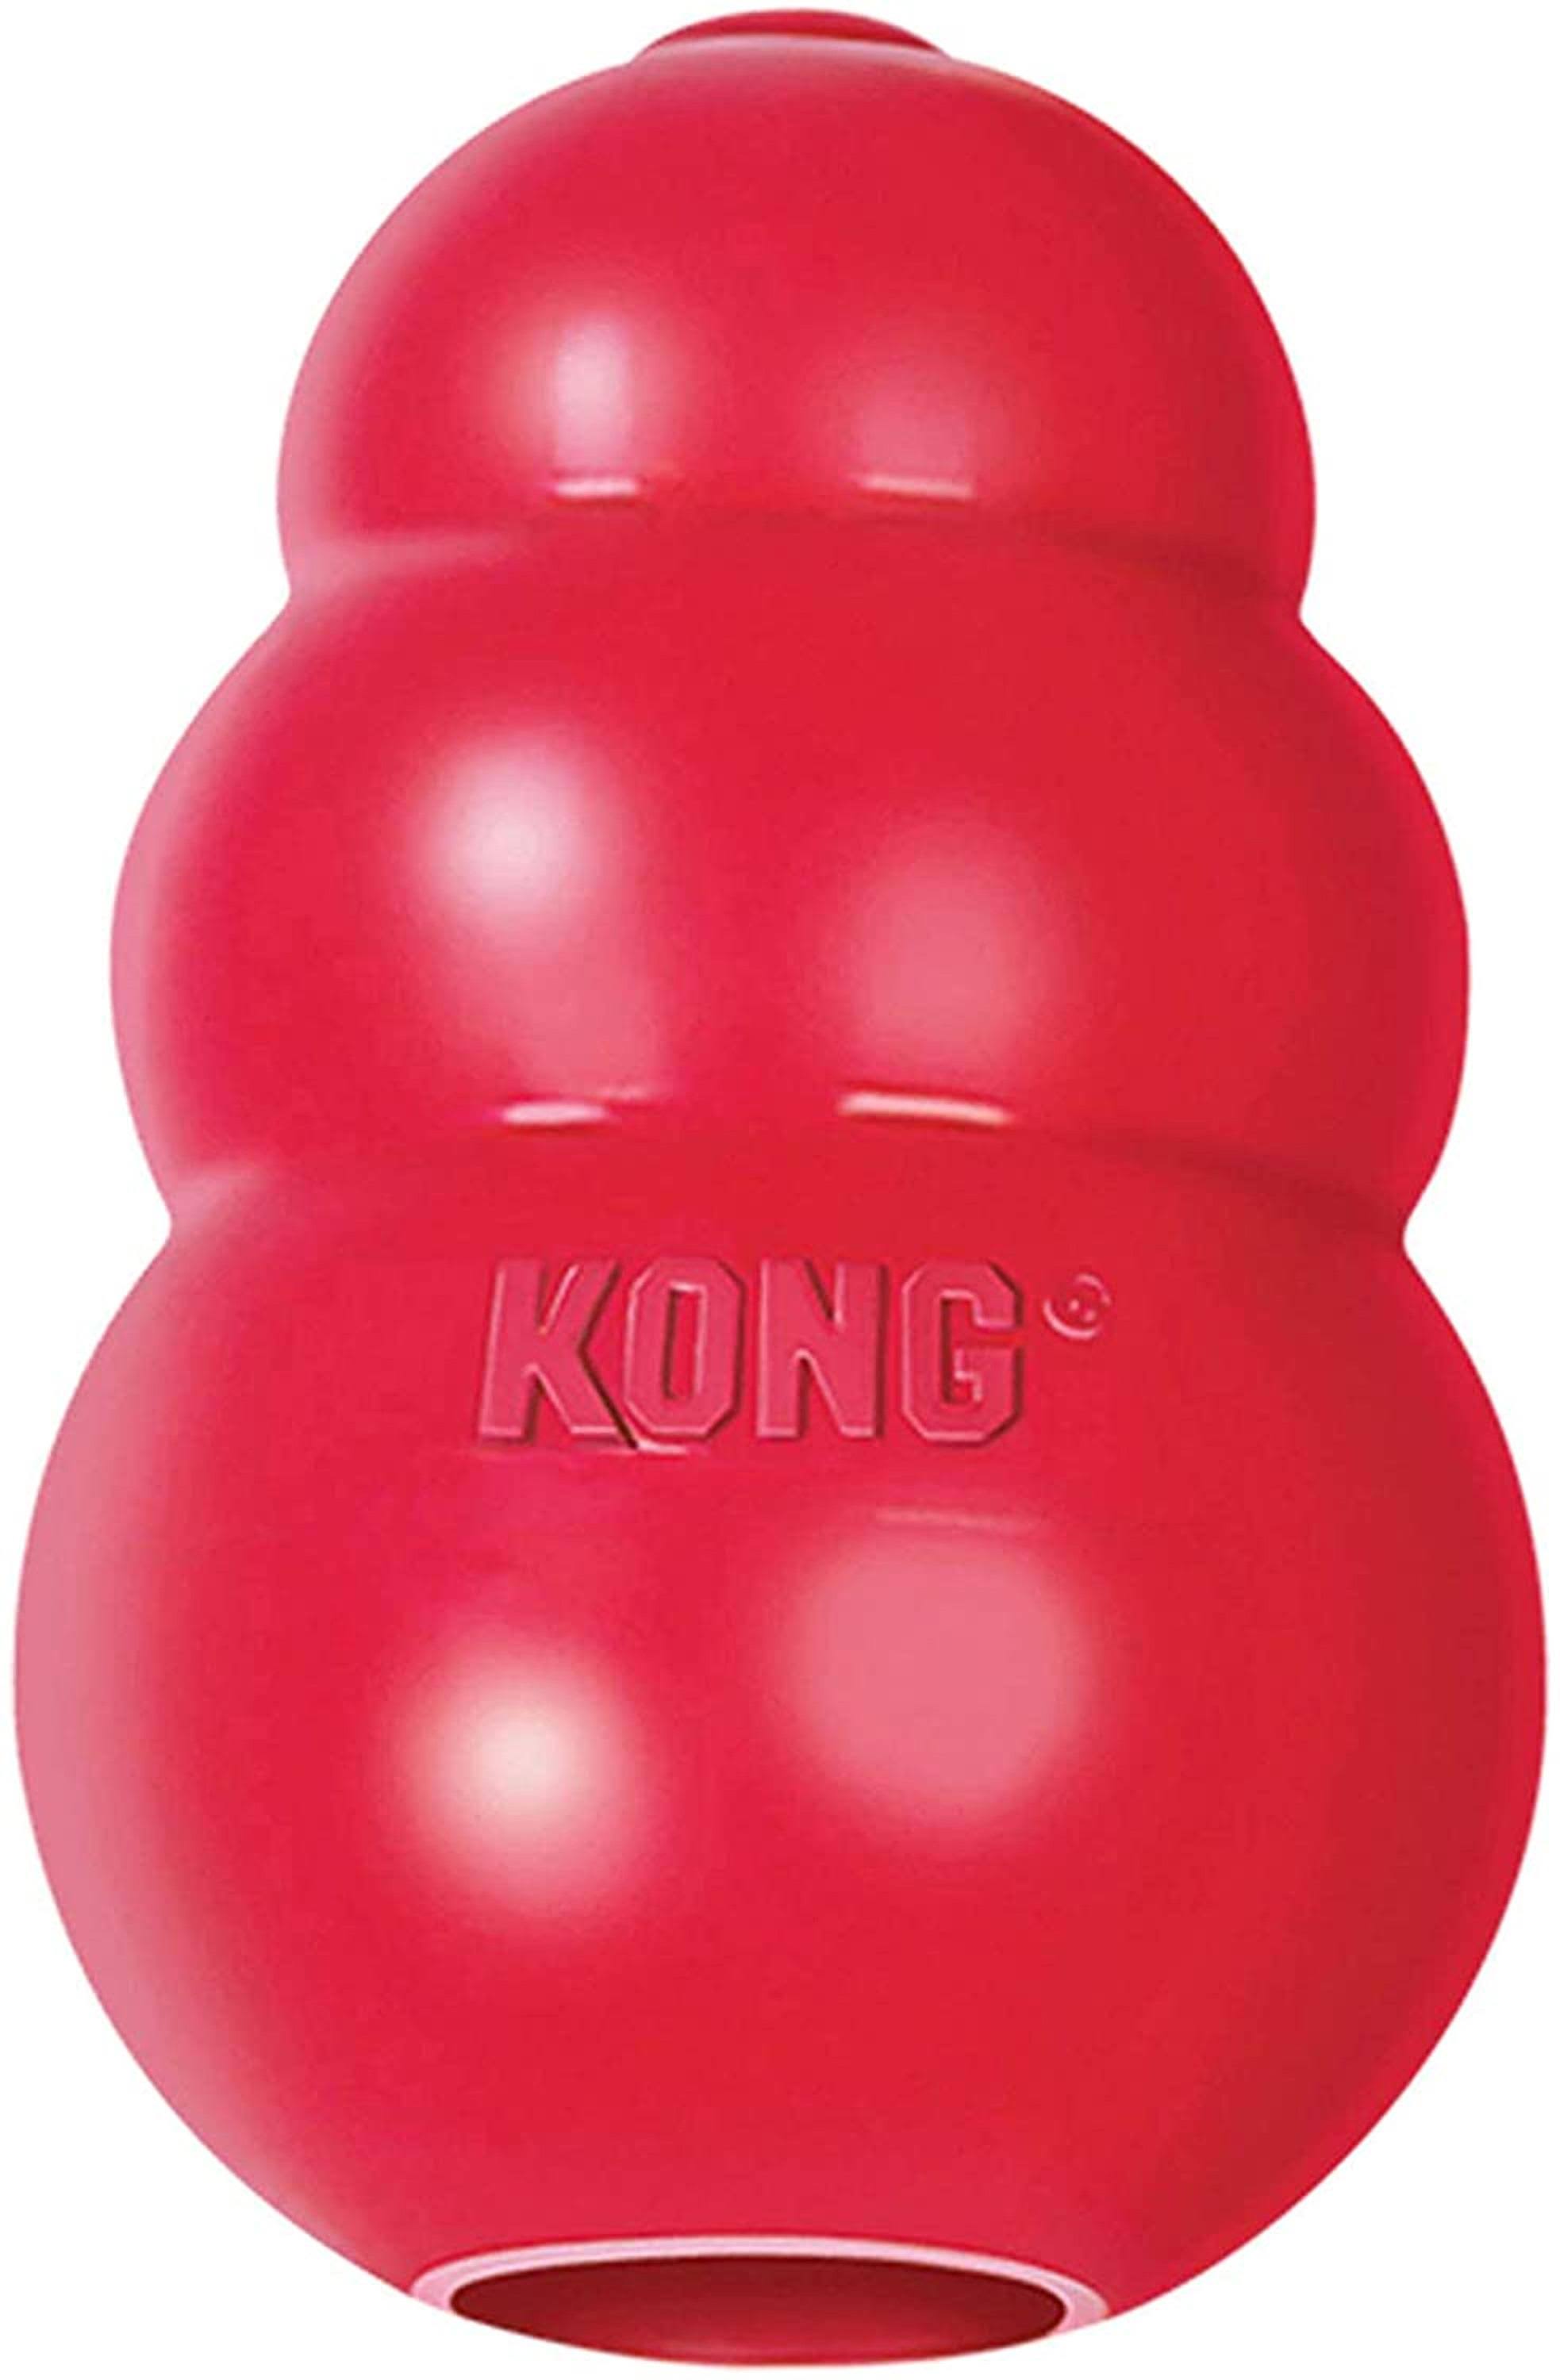 Kong Chew Dog Toy - Red, X Large